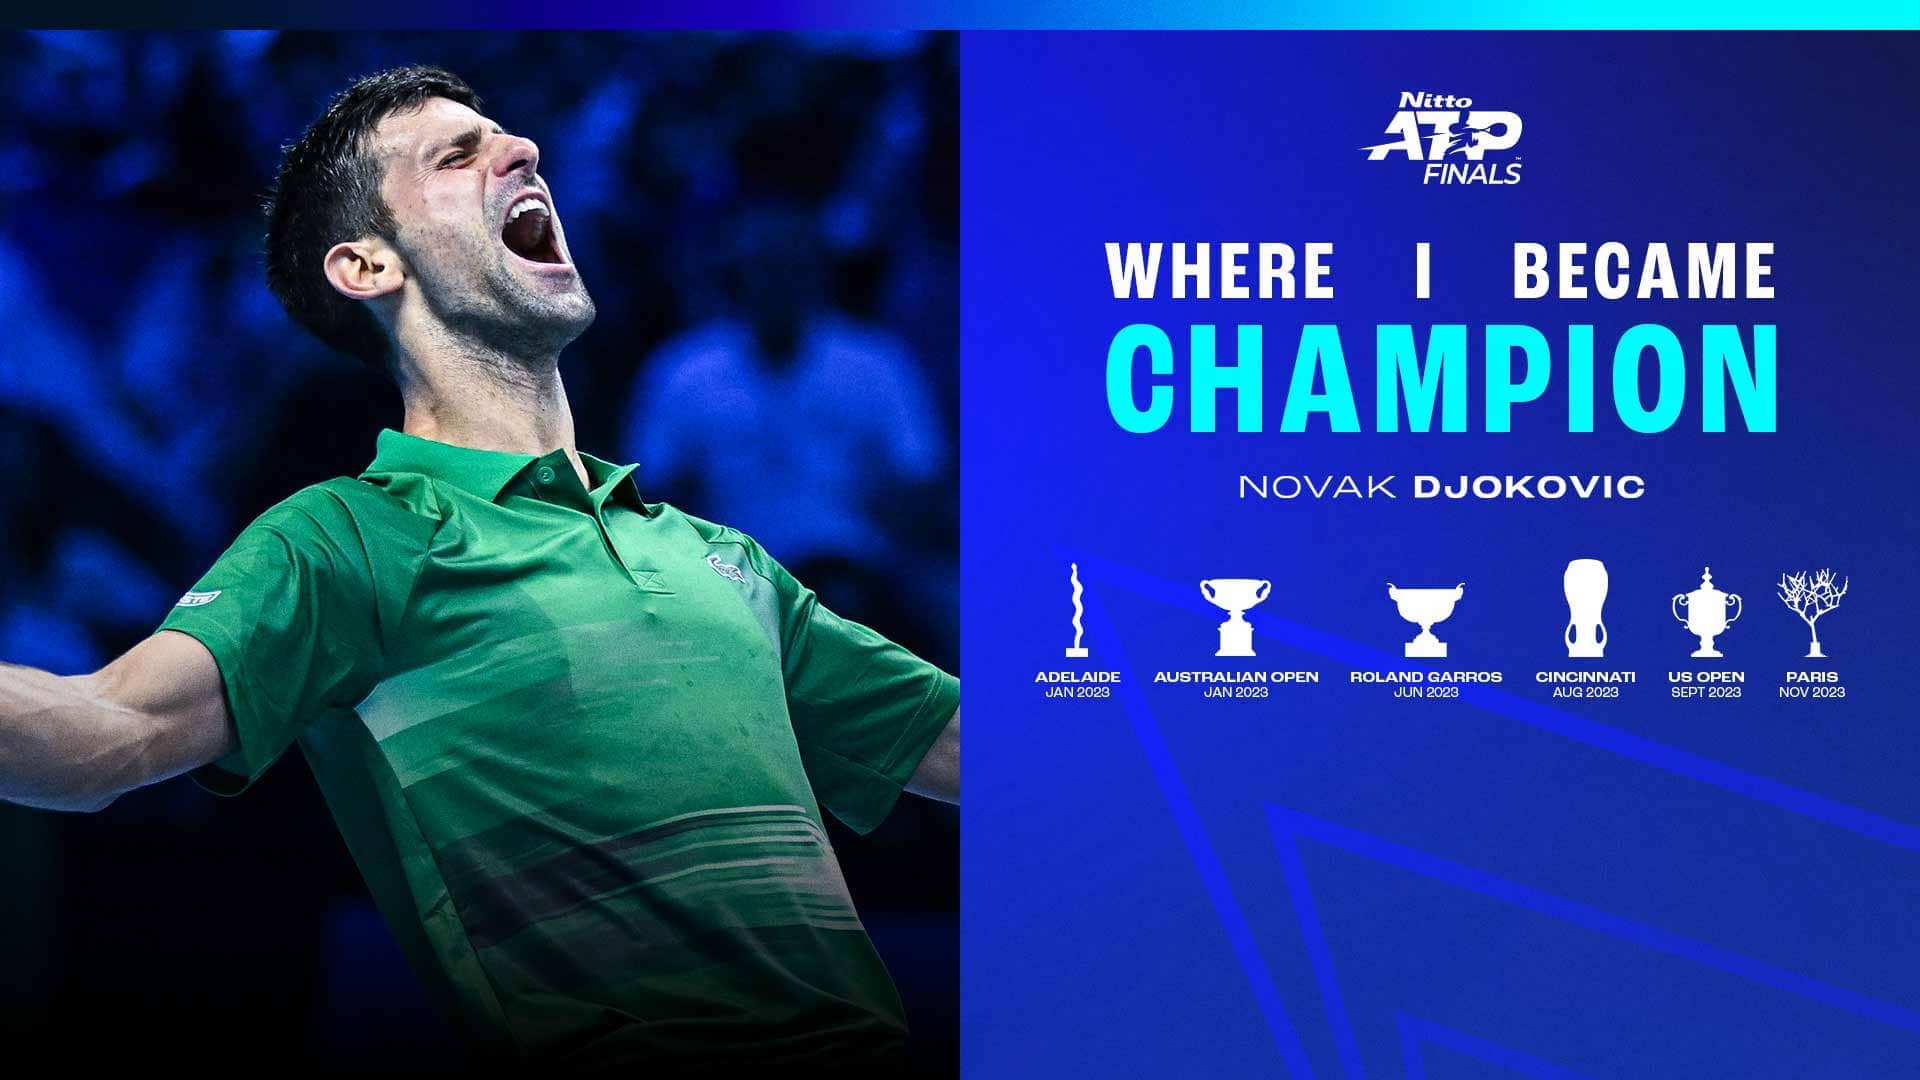 Djokovic Aims To Pass Federer For Most Nitto ATP Finals Titles News Article Nitto ATP Finals Tennis